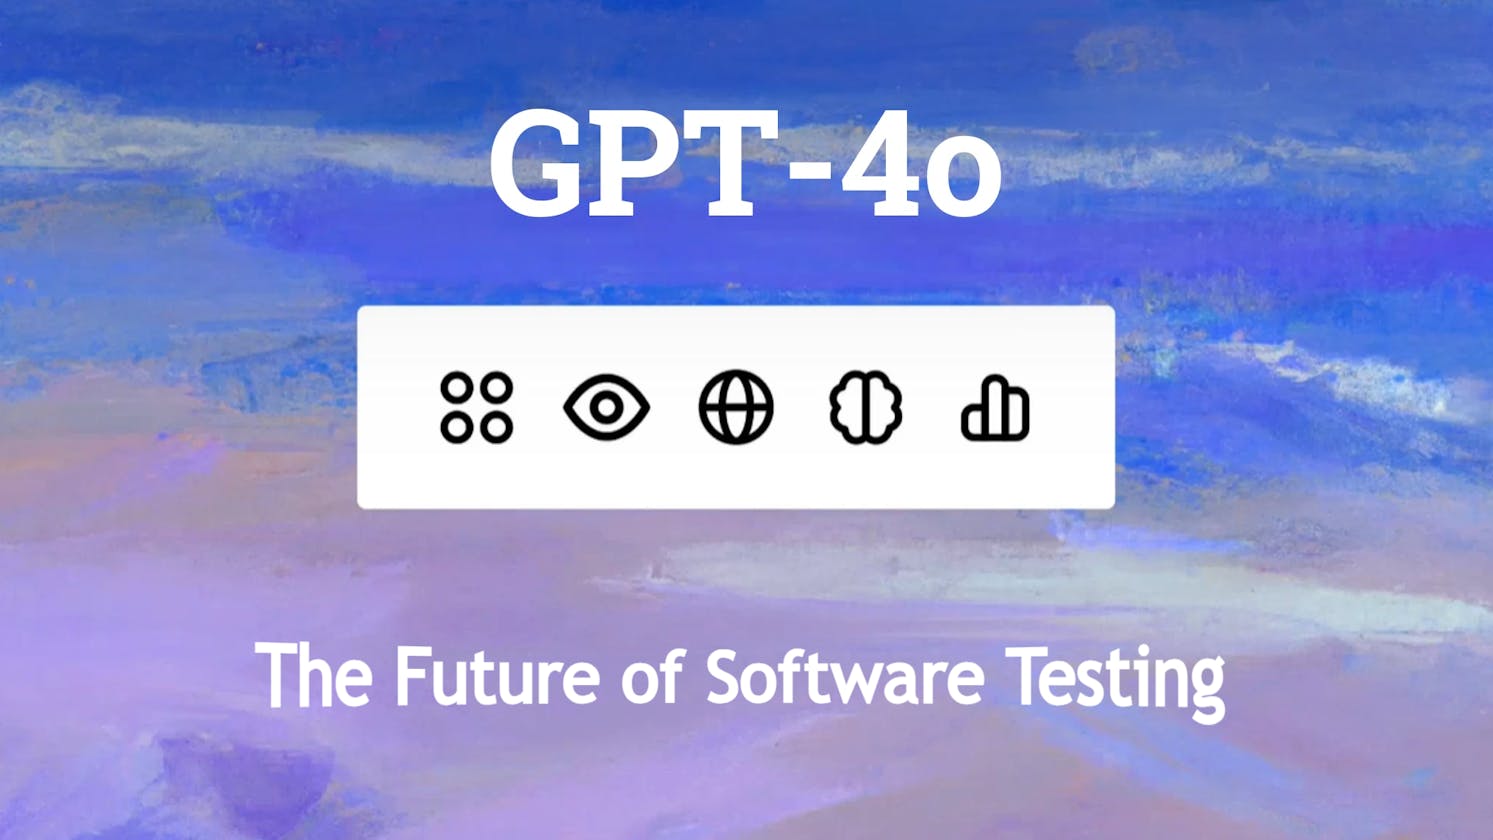 The Future of Software Testing: How GPT-4o is Transforming the Testing Process